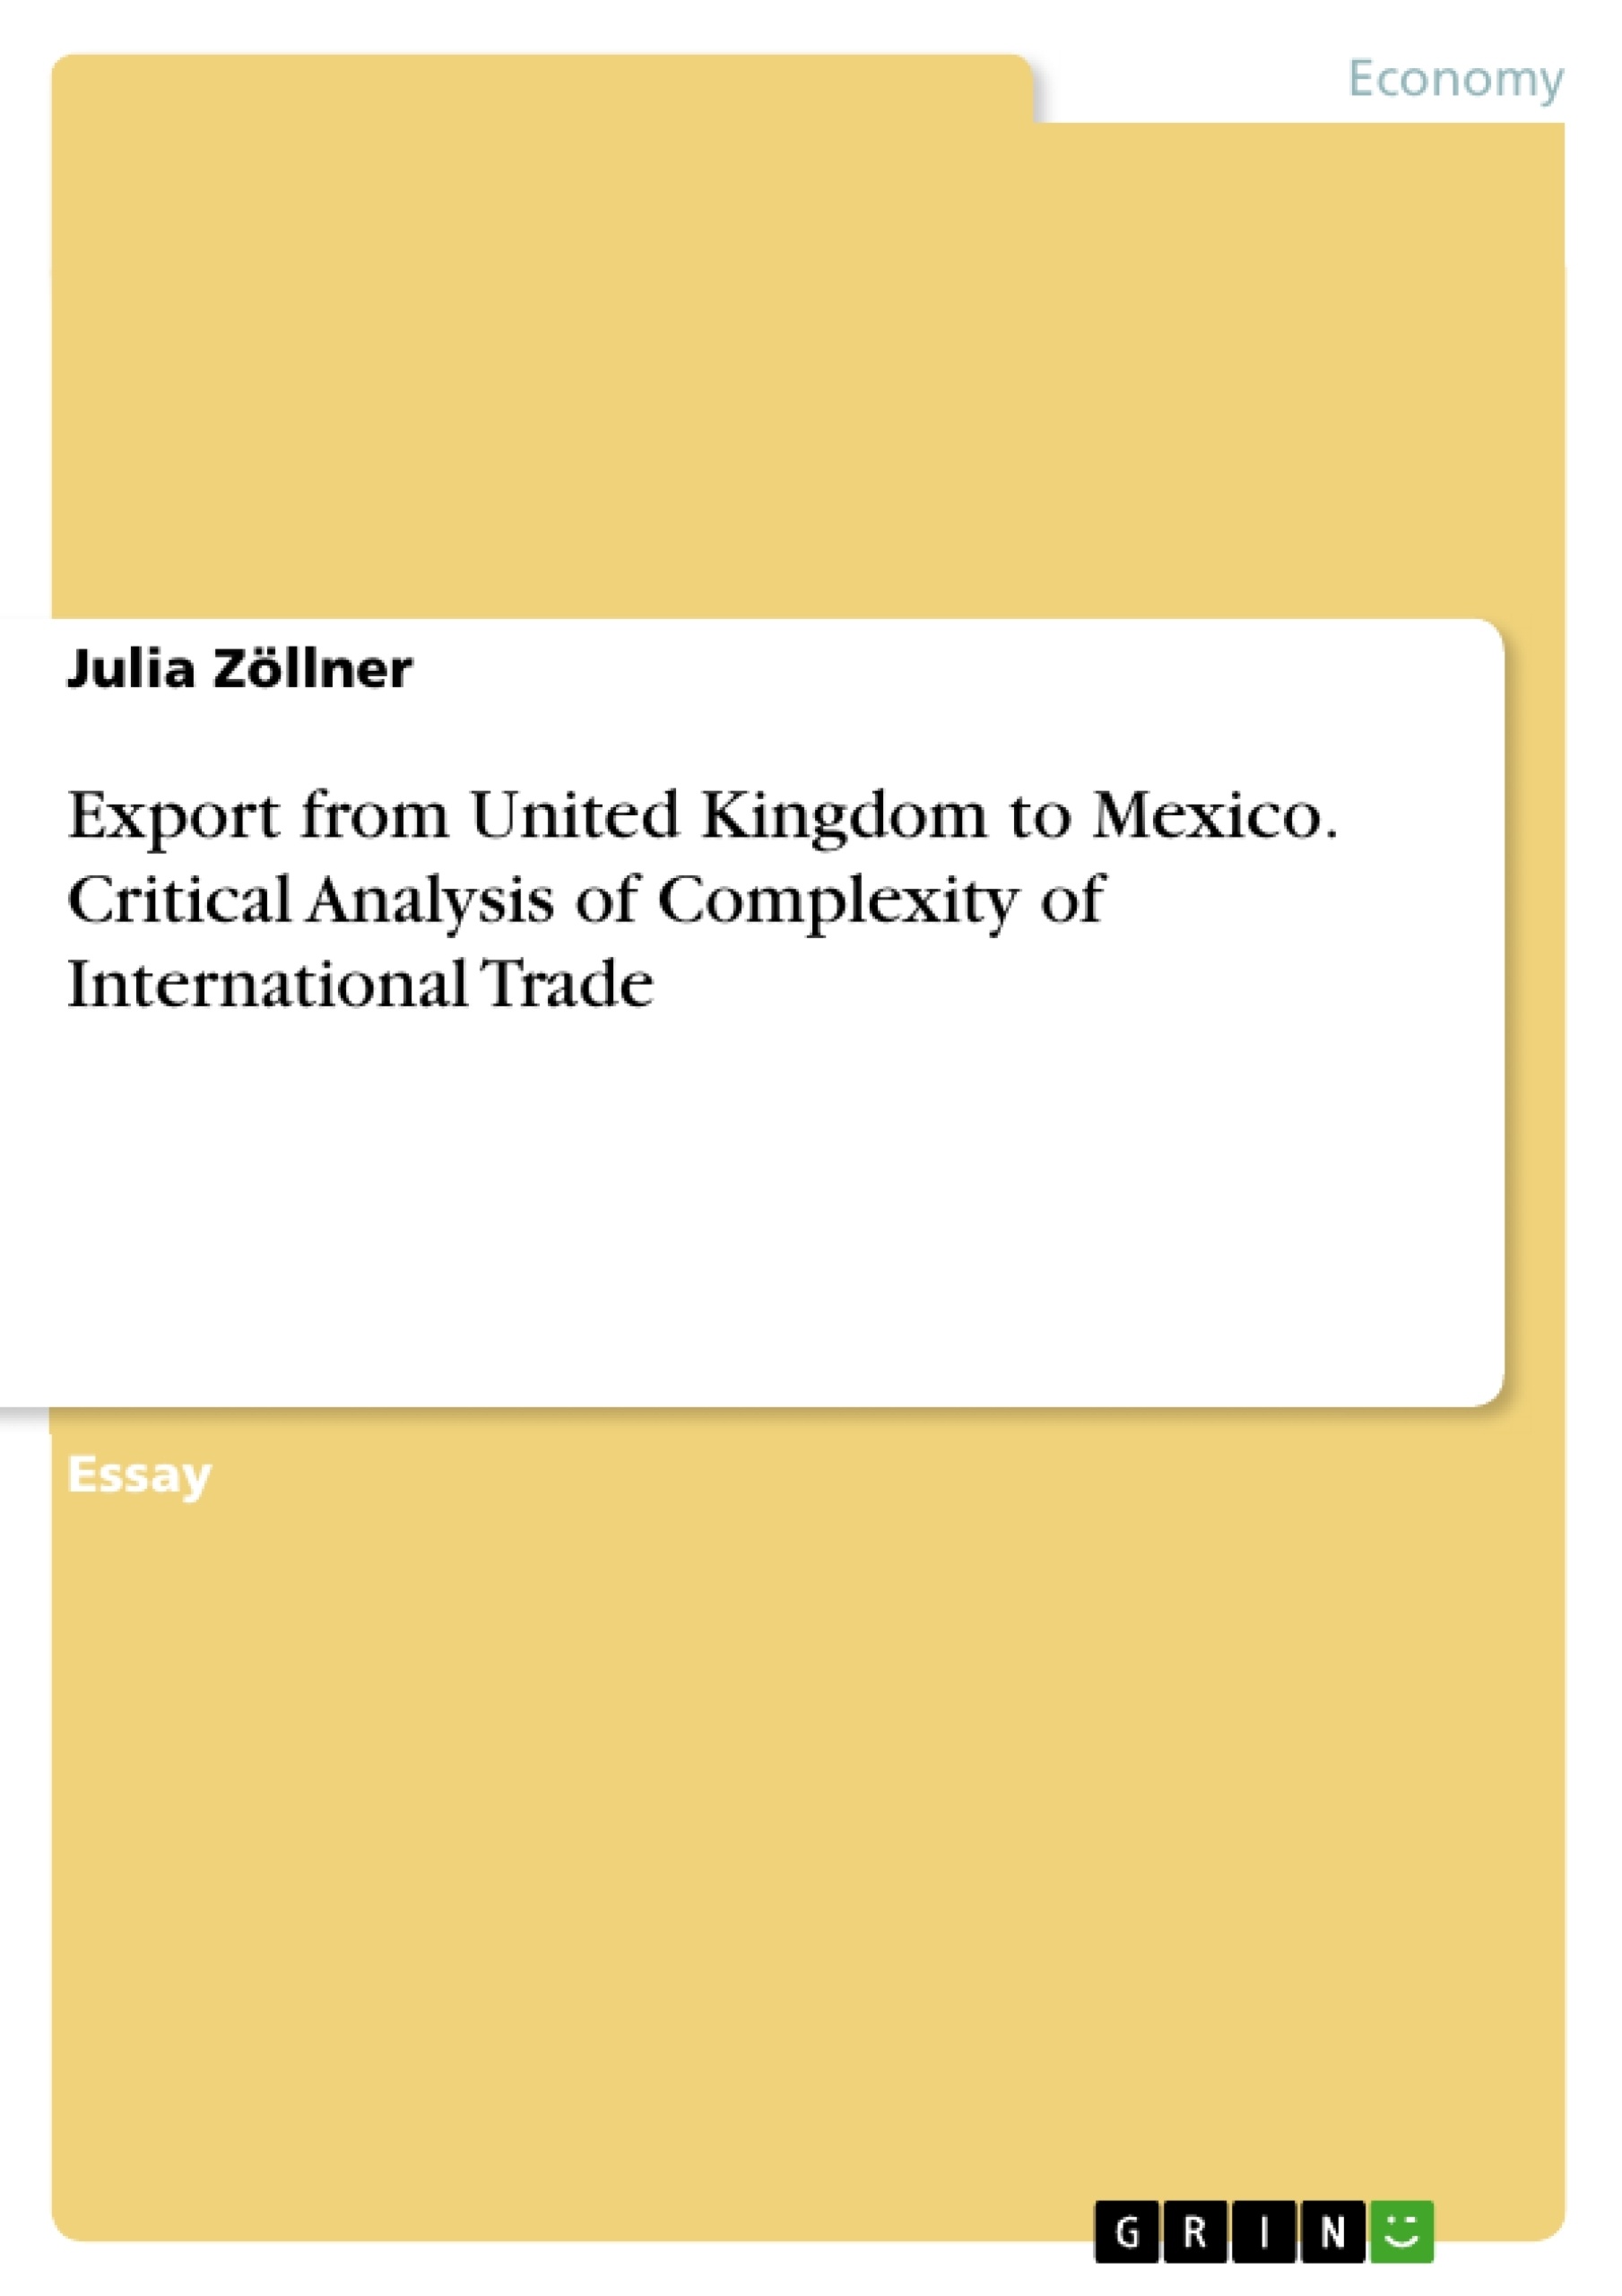 Título: Export from United Kingdom to Mexico. Critical Analysis of Complexity of International Trade